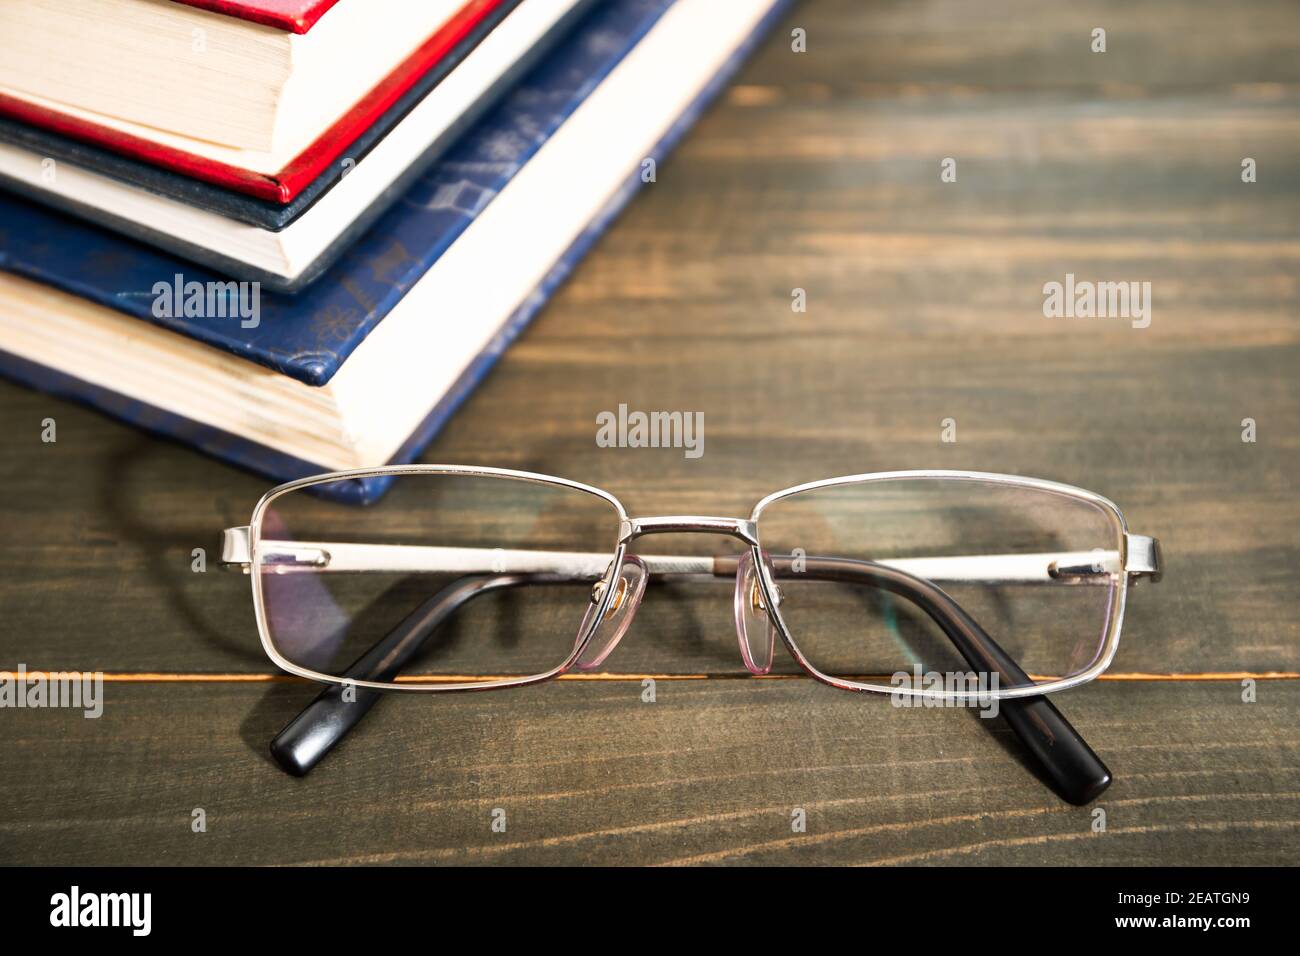 Glasses and stack of hardcover books Stock Photo